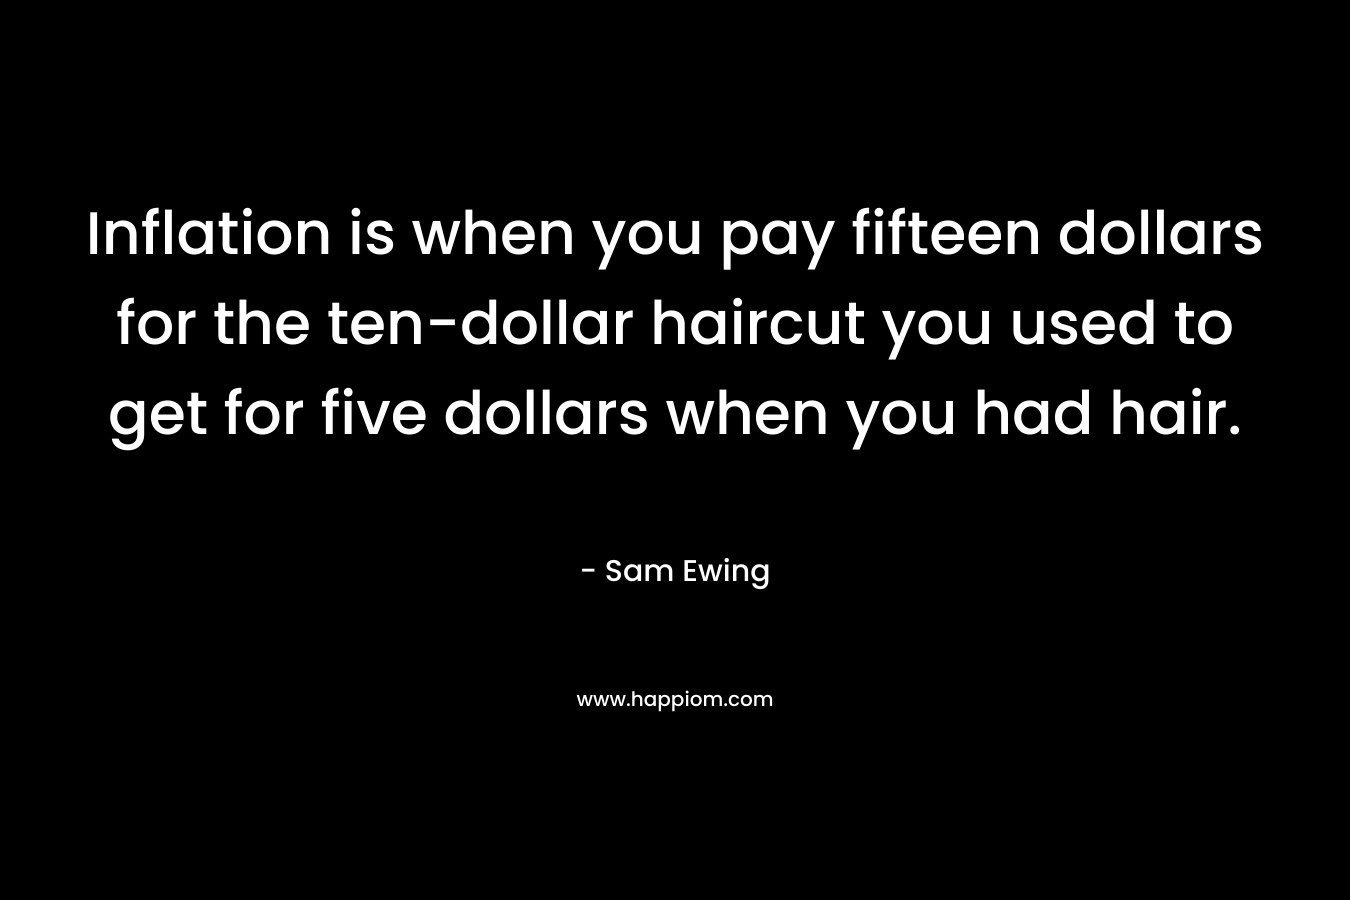 Inflation is when you pay fifteen dollars for the ten-dollar haircut you used to get for five dollars when you had hair. – Sam Ewing